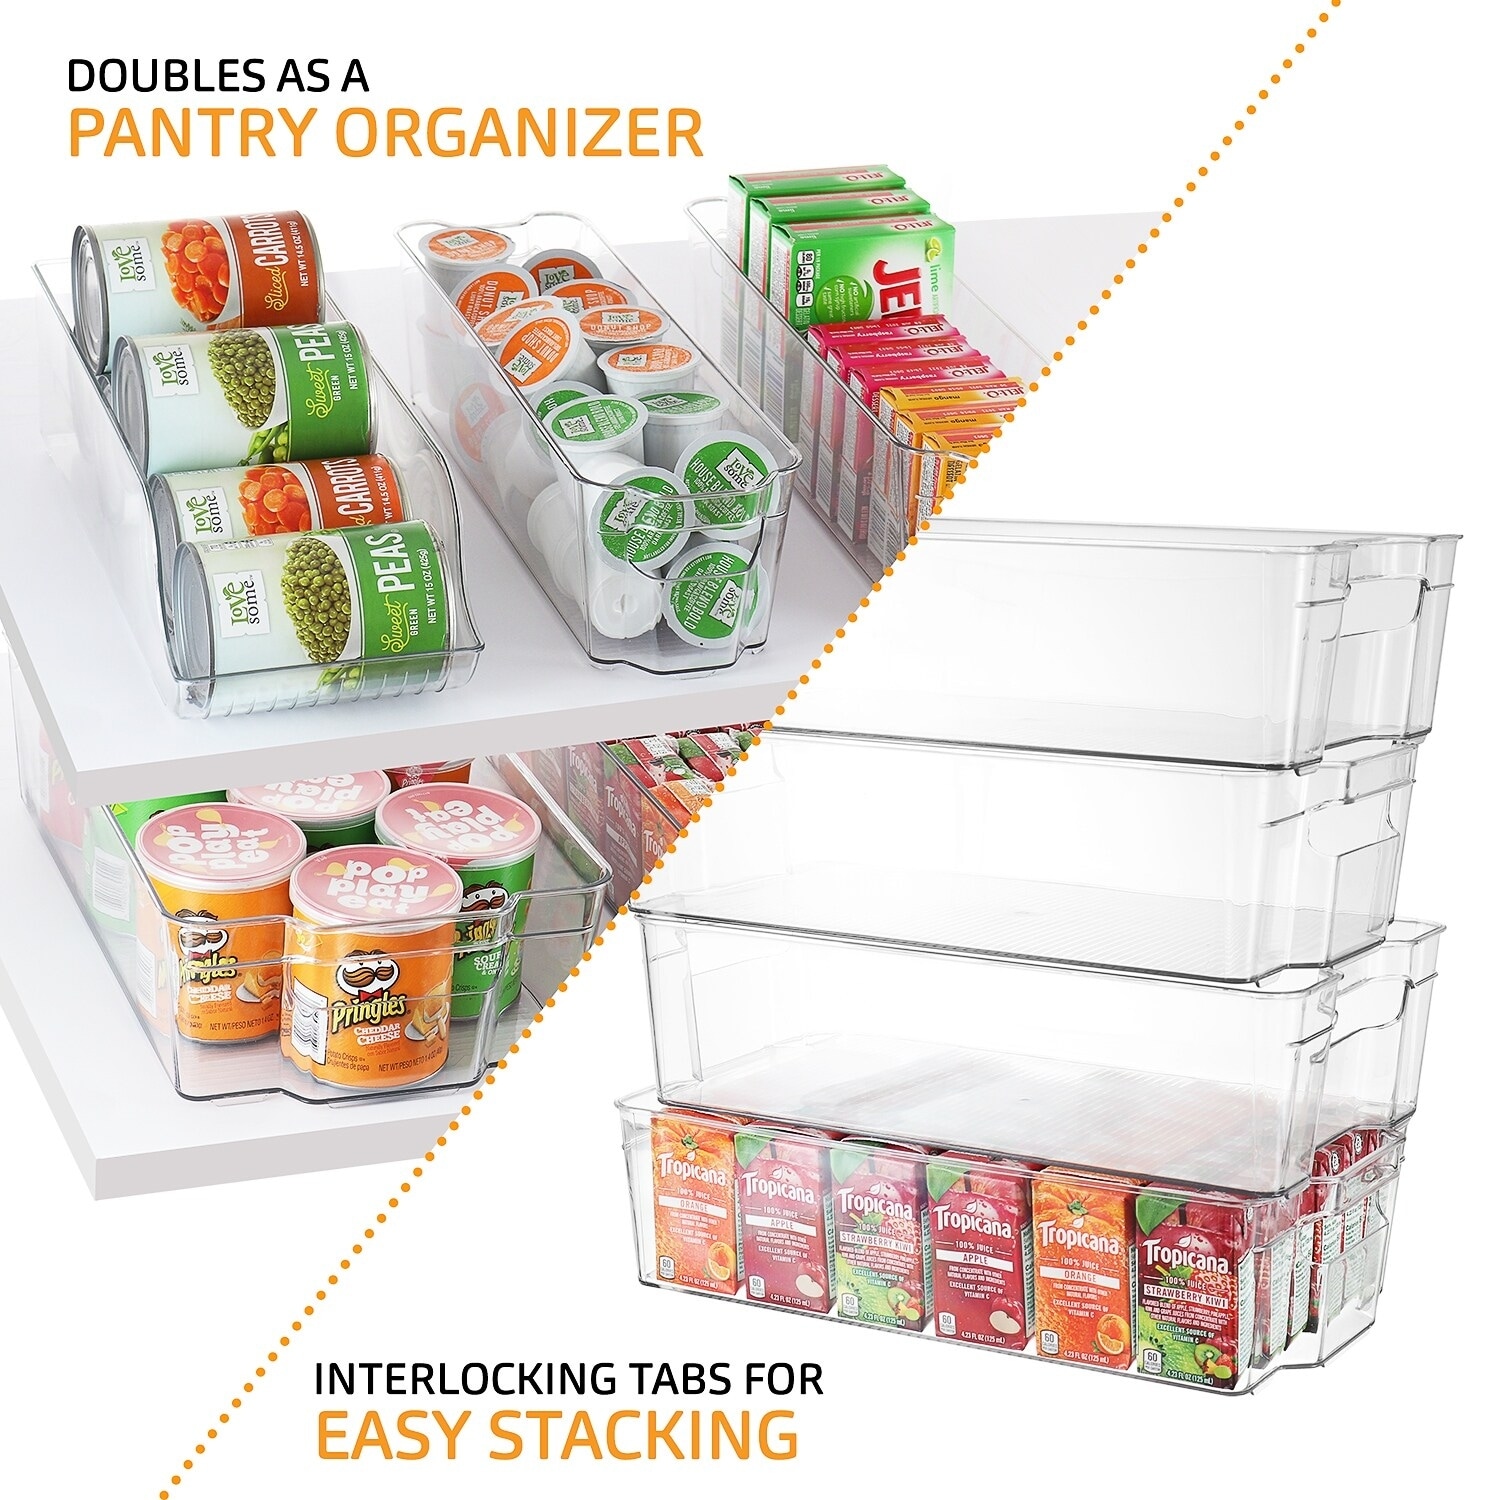 Sorbus Fridge and Freezer Bins Refrigerator Organizer Stackable Food  Storage Containers (Set of 8)